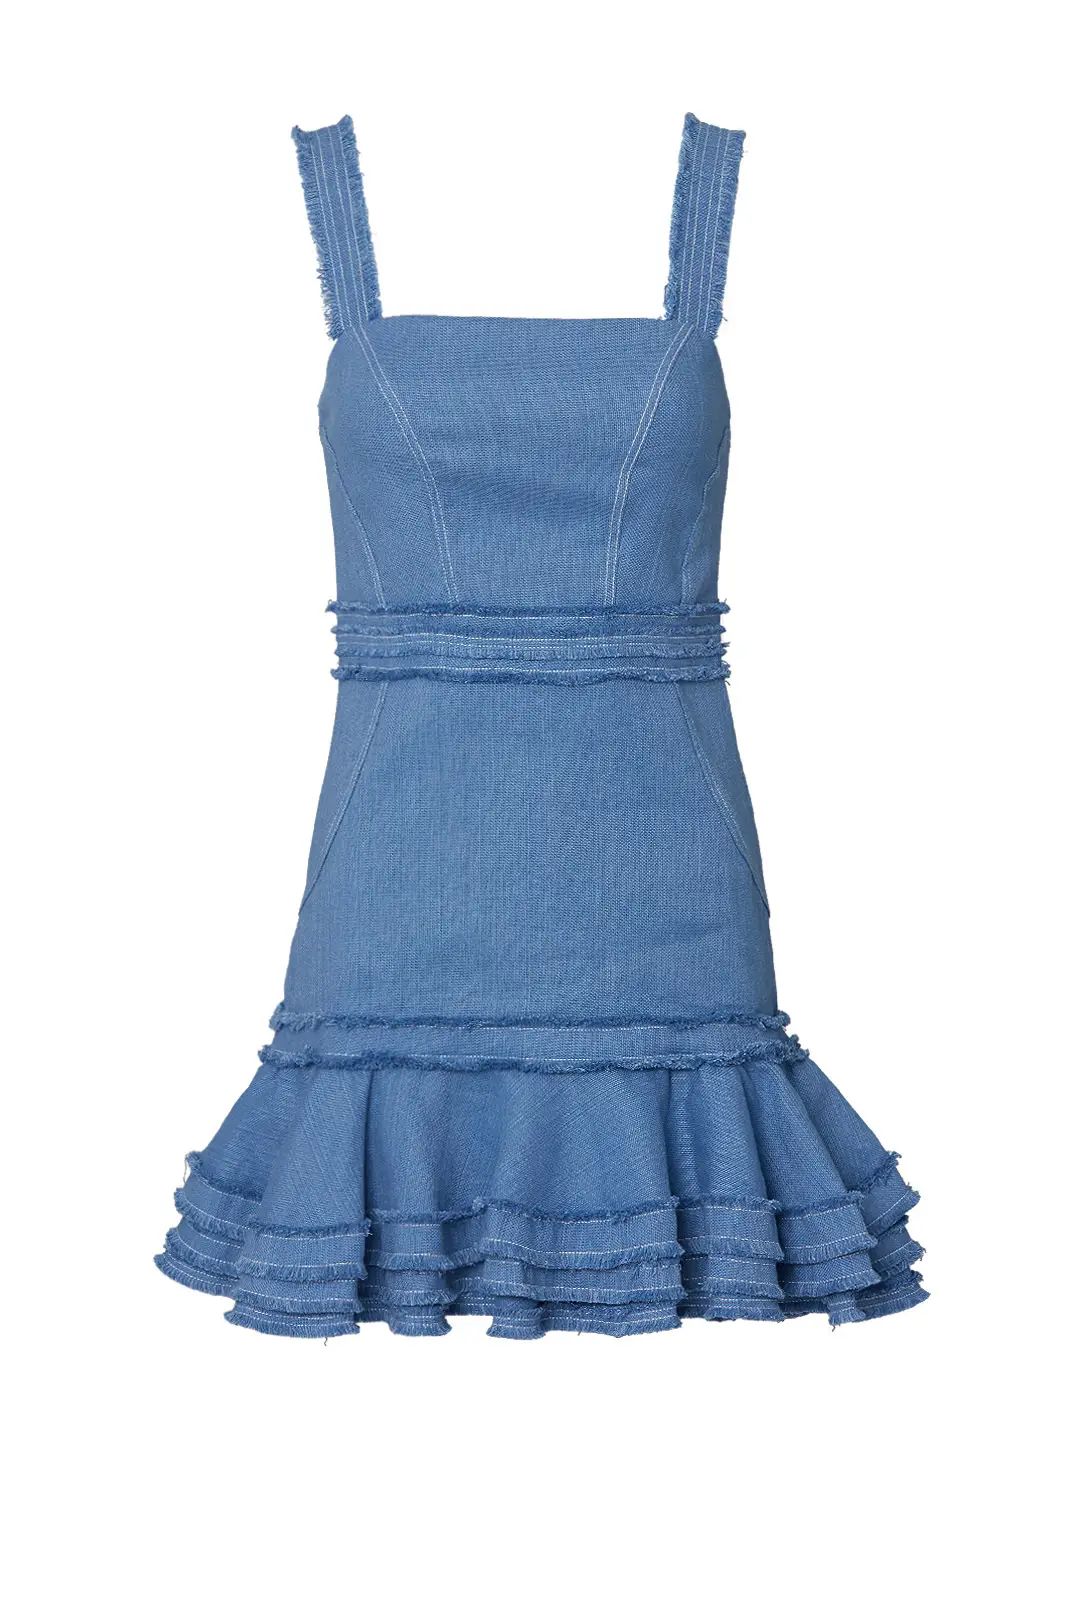 Alexis Judith Fit and Flare Dress | Rent the Runway